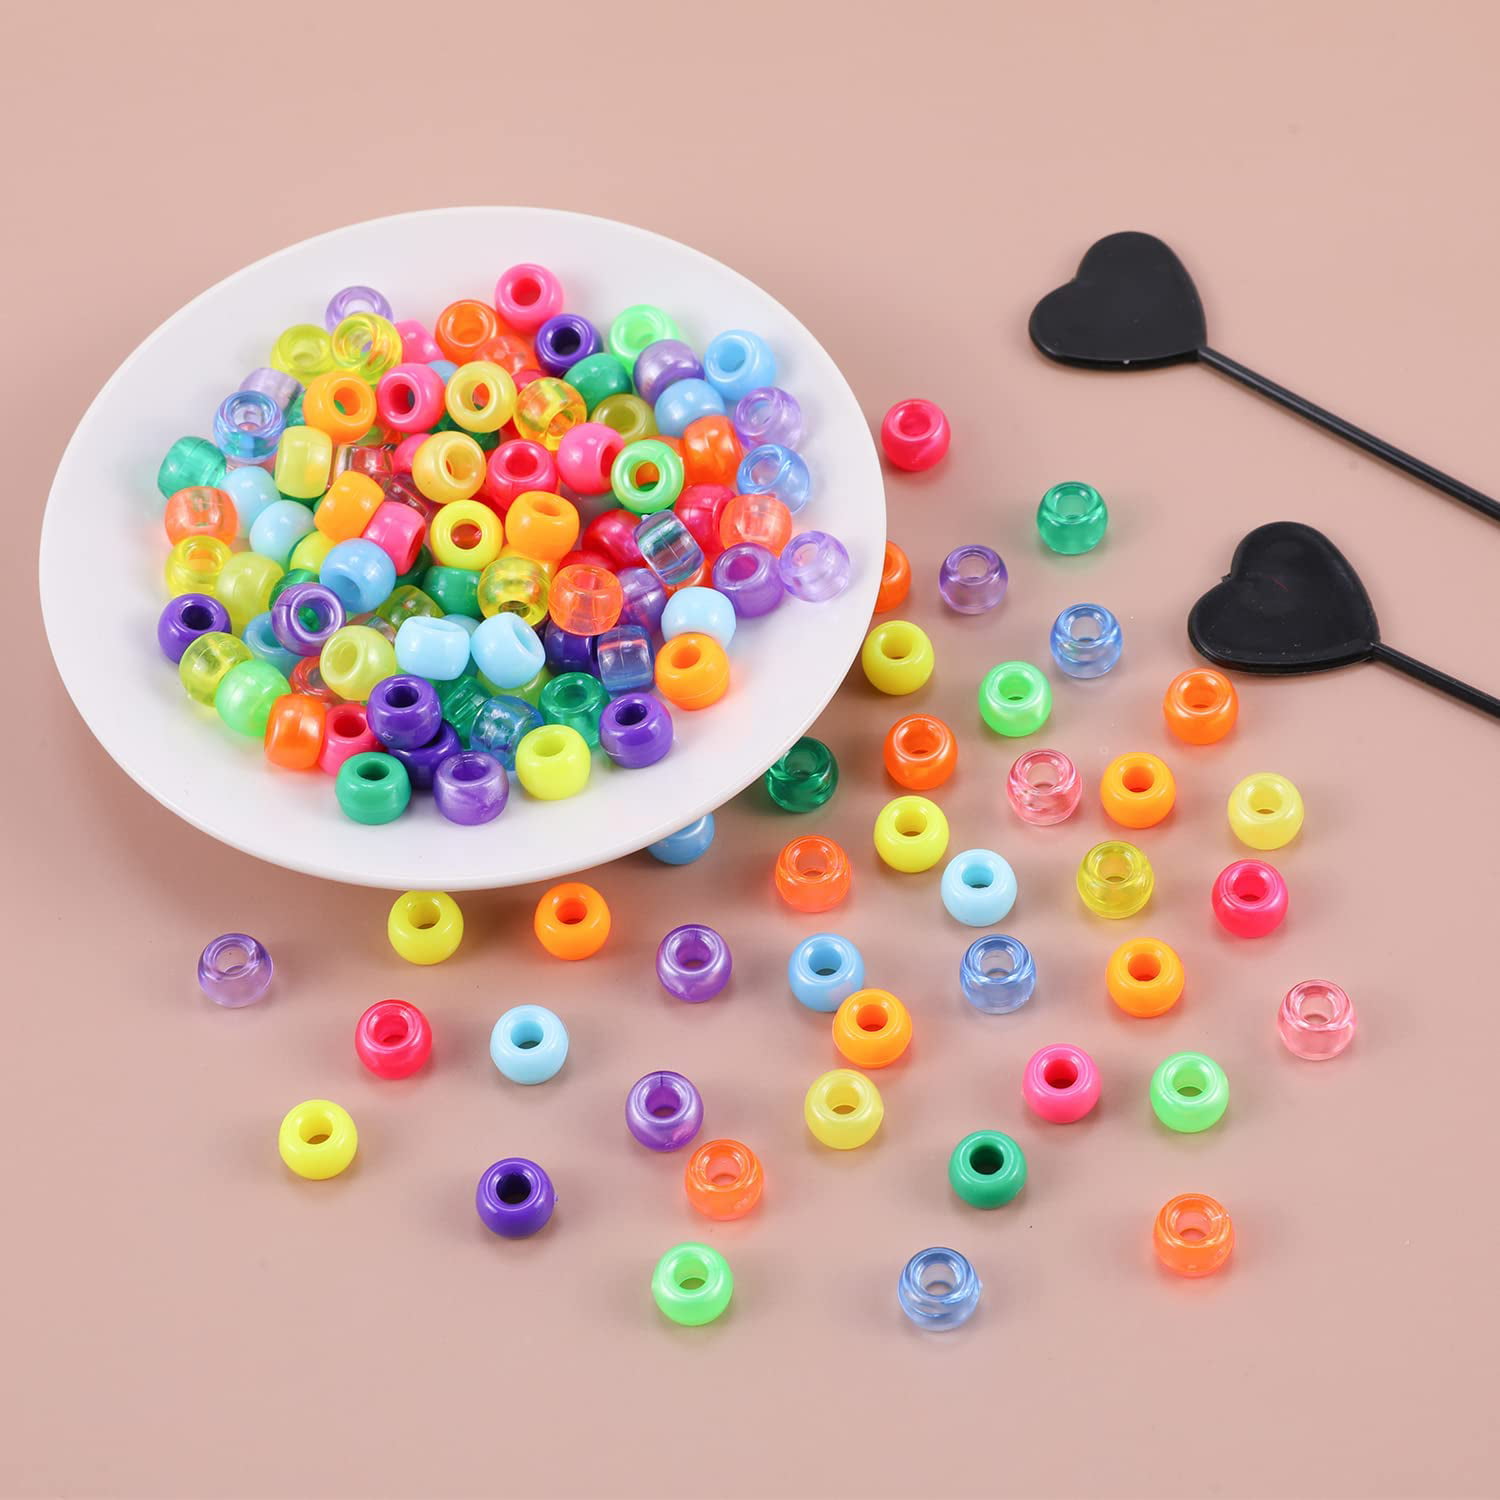 Miss Rabbit 1610+ Pcs Kandi Beads Bracelet Making Kit, Rainbow Pony Beads  for Jewelry Making with Letter Beads Elastic String, Hair Beads for Braids